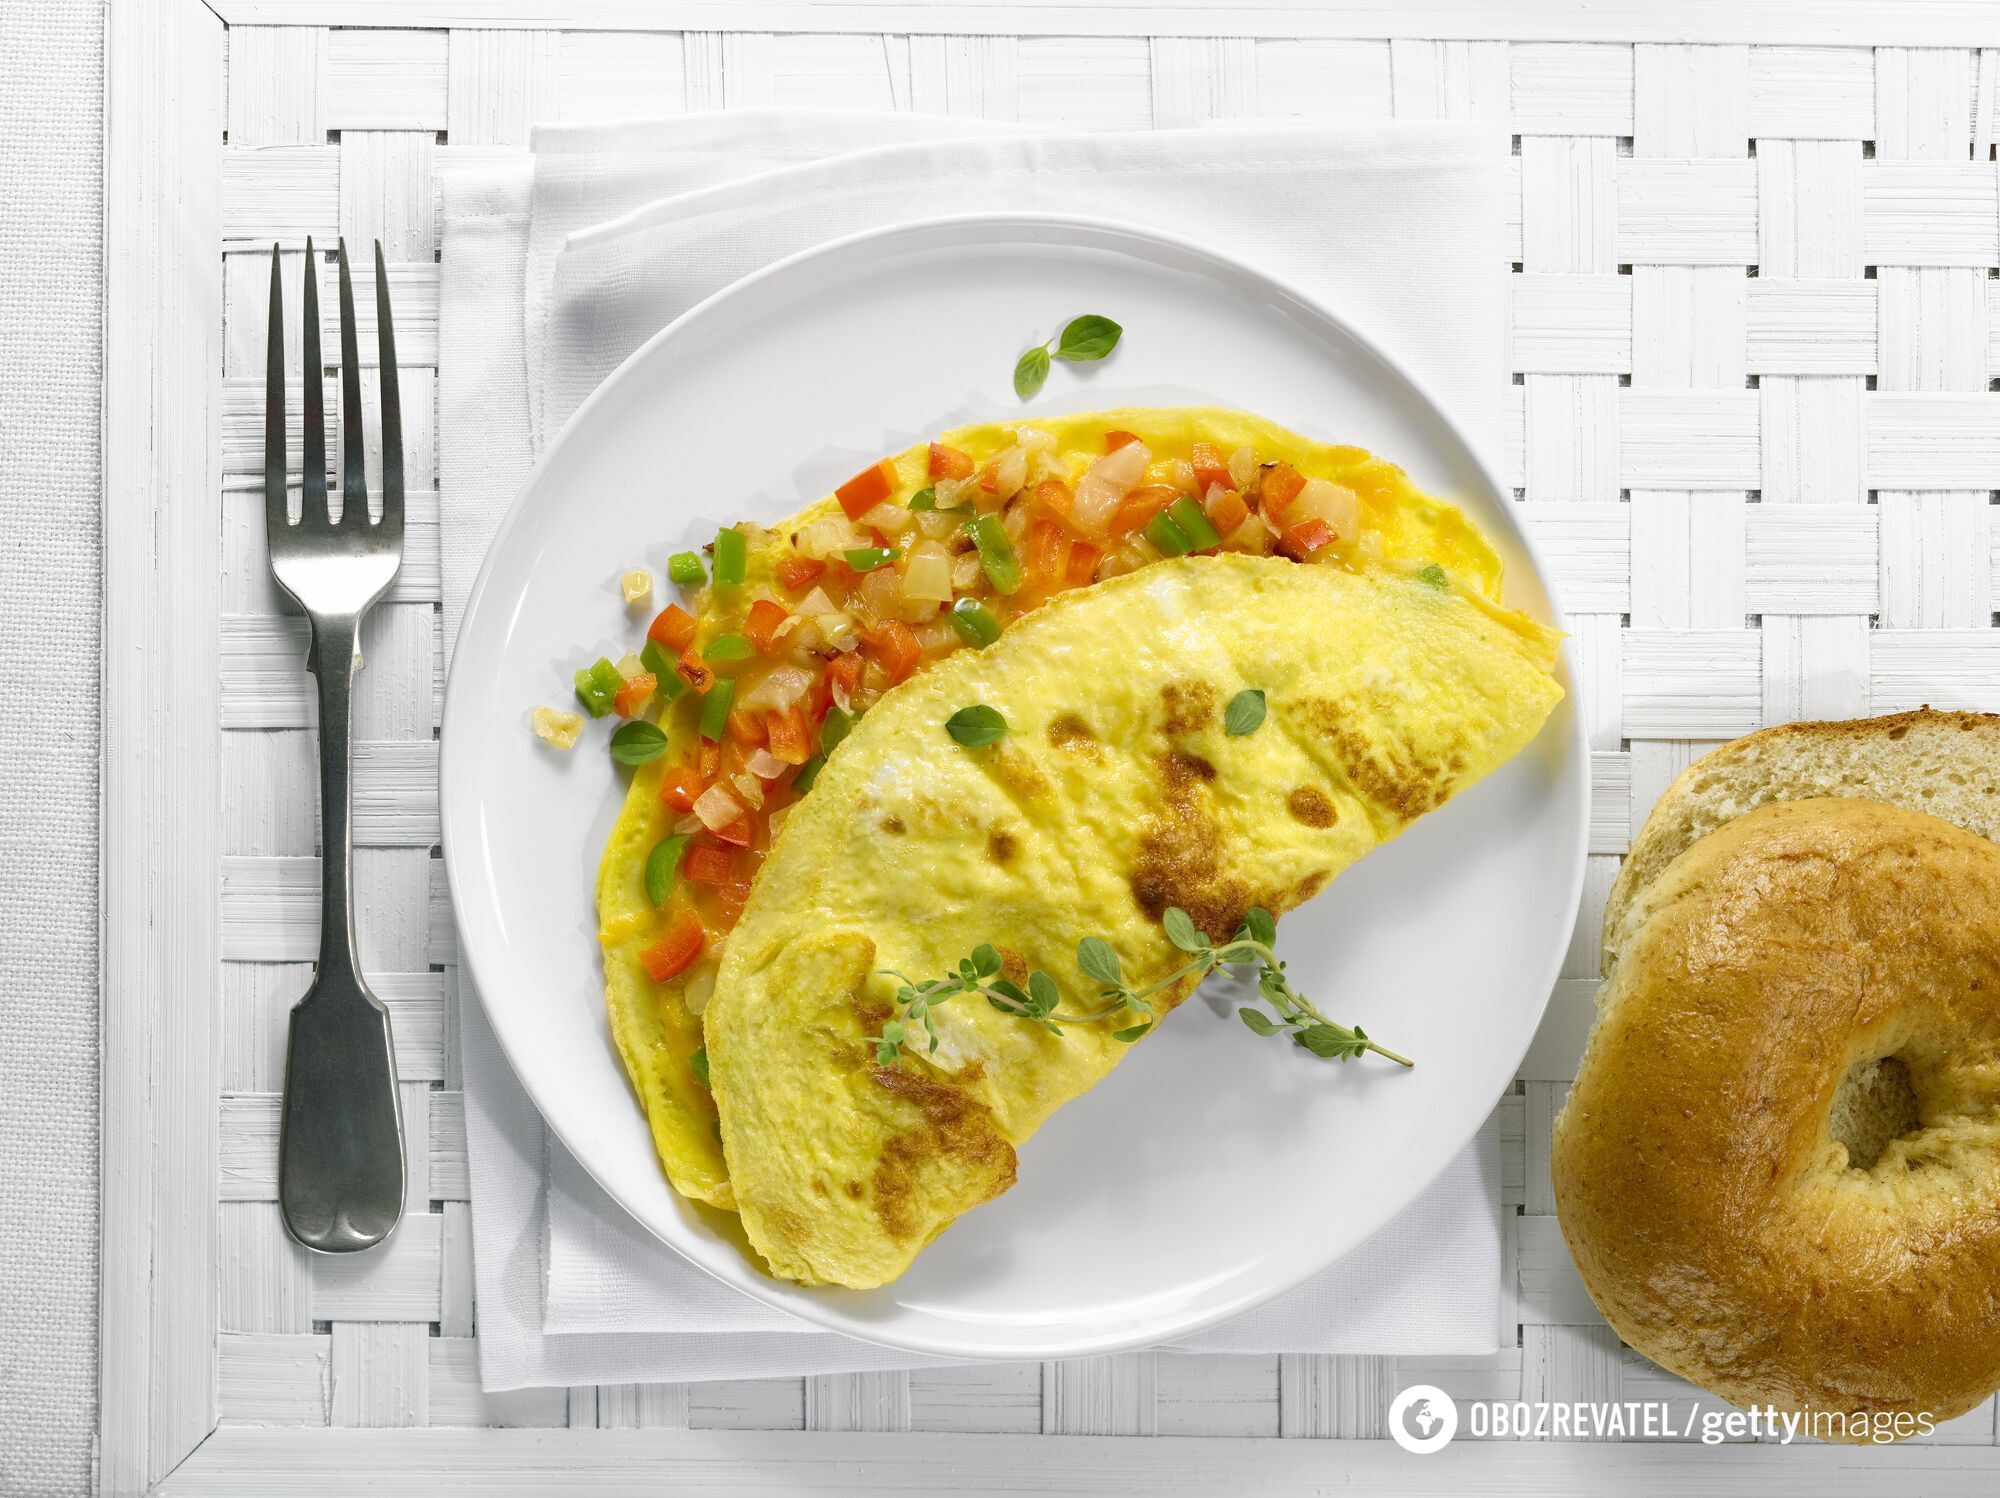 Japanese omelet with vegetables